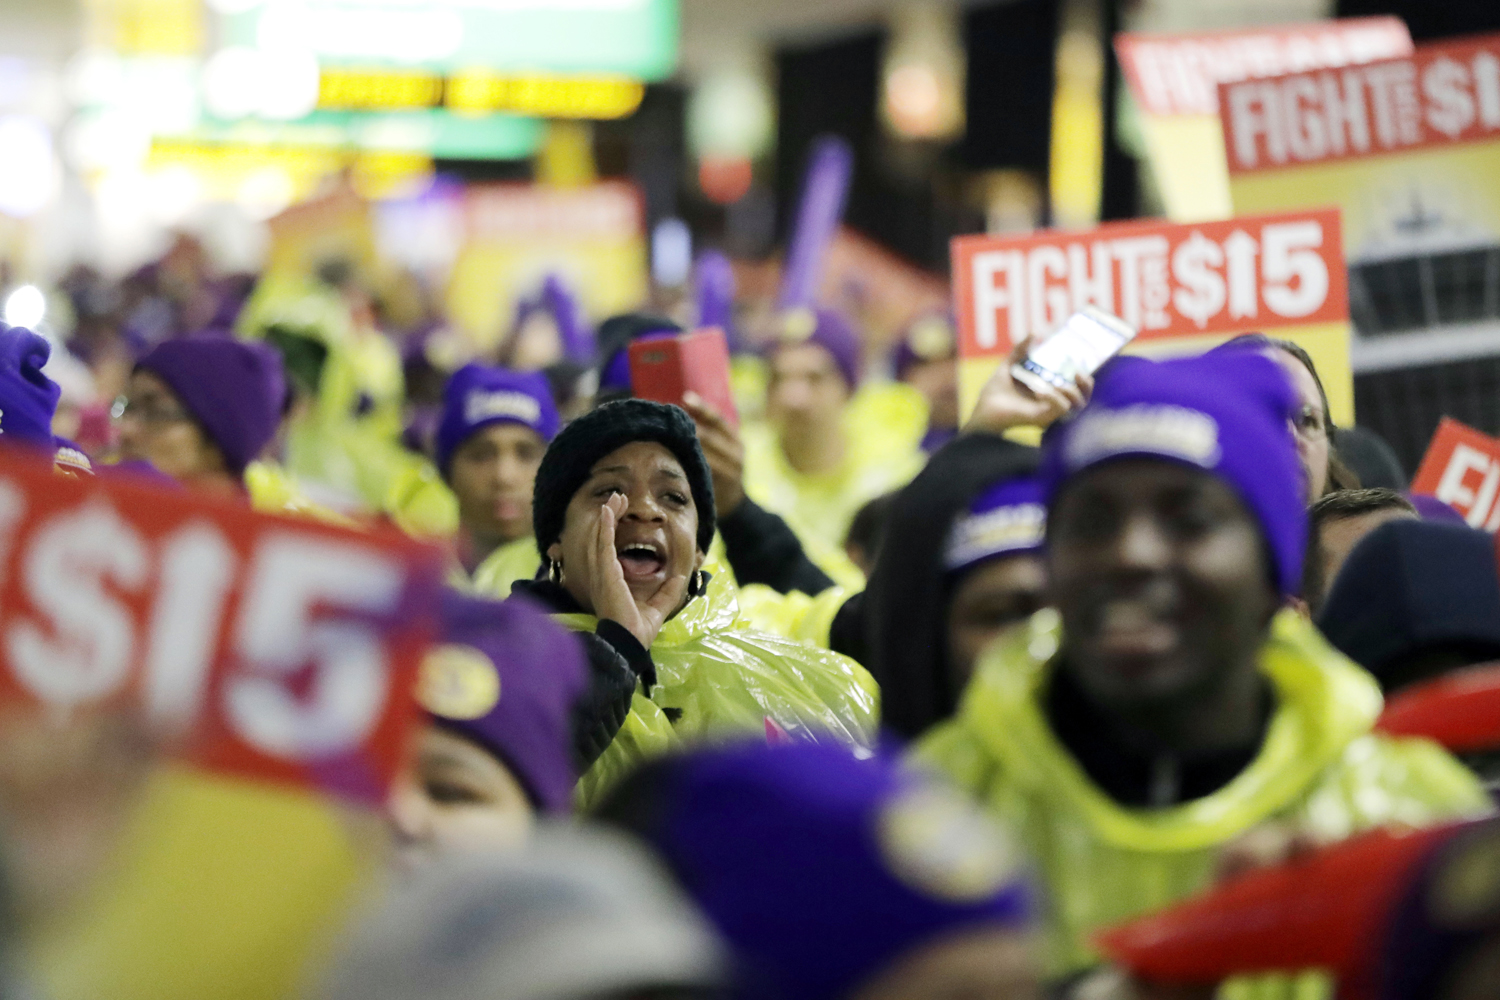 A woman shouts while marching with service workers asking for $15 minimum wage pay during a rally at Newark Liberty International Airport, Tuesday, Nov. 29, 2016, in Newark, N.J. The event was part of the National Day of Action to Fight for $15. (Julio Cortez/AP)